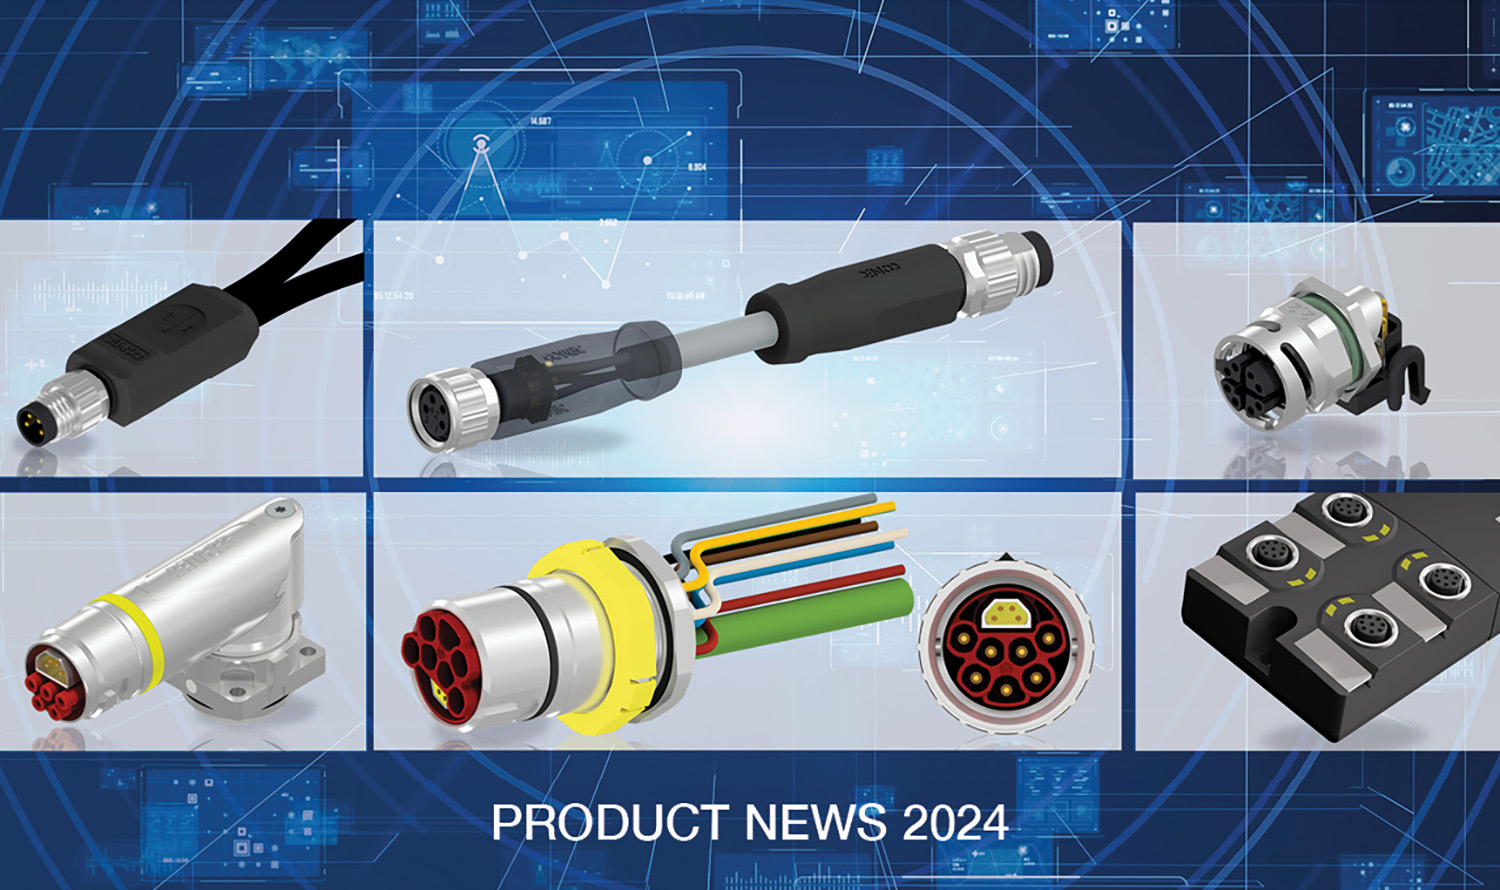 PRODUCT NEWS 2024